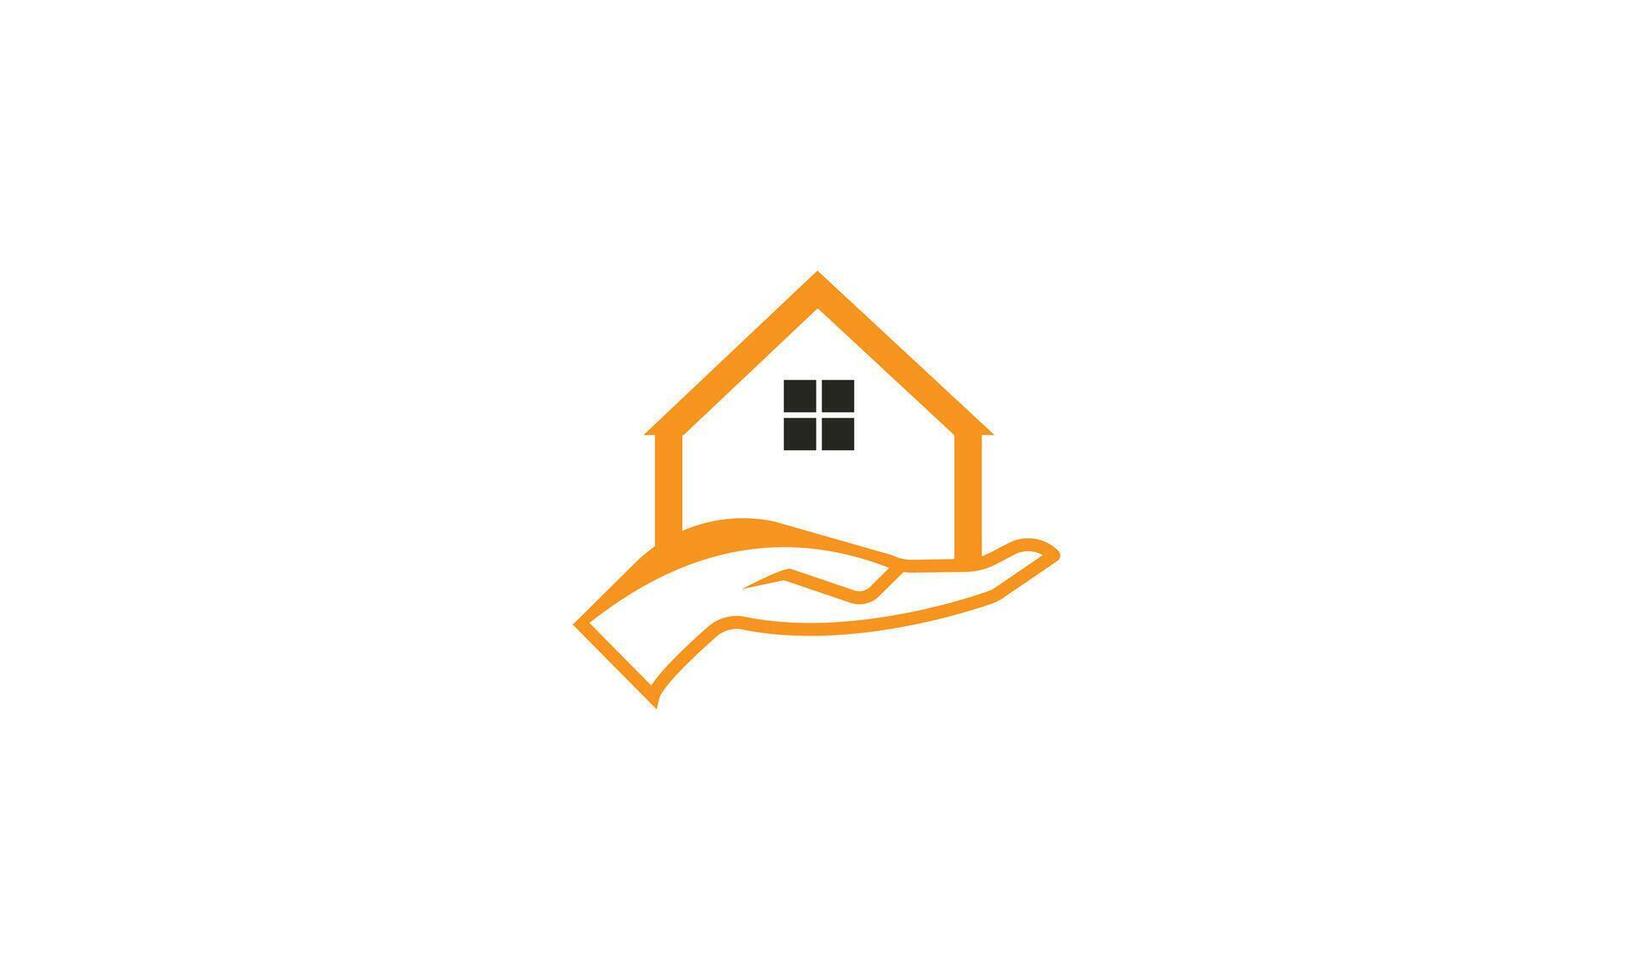 A visual representation of the community we foster, our home logo is a place of togetherness. vector